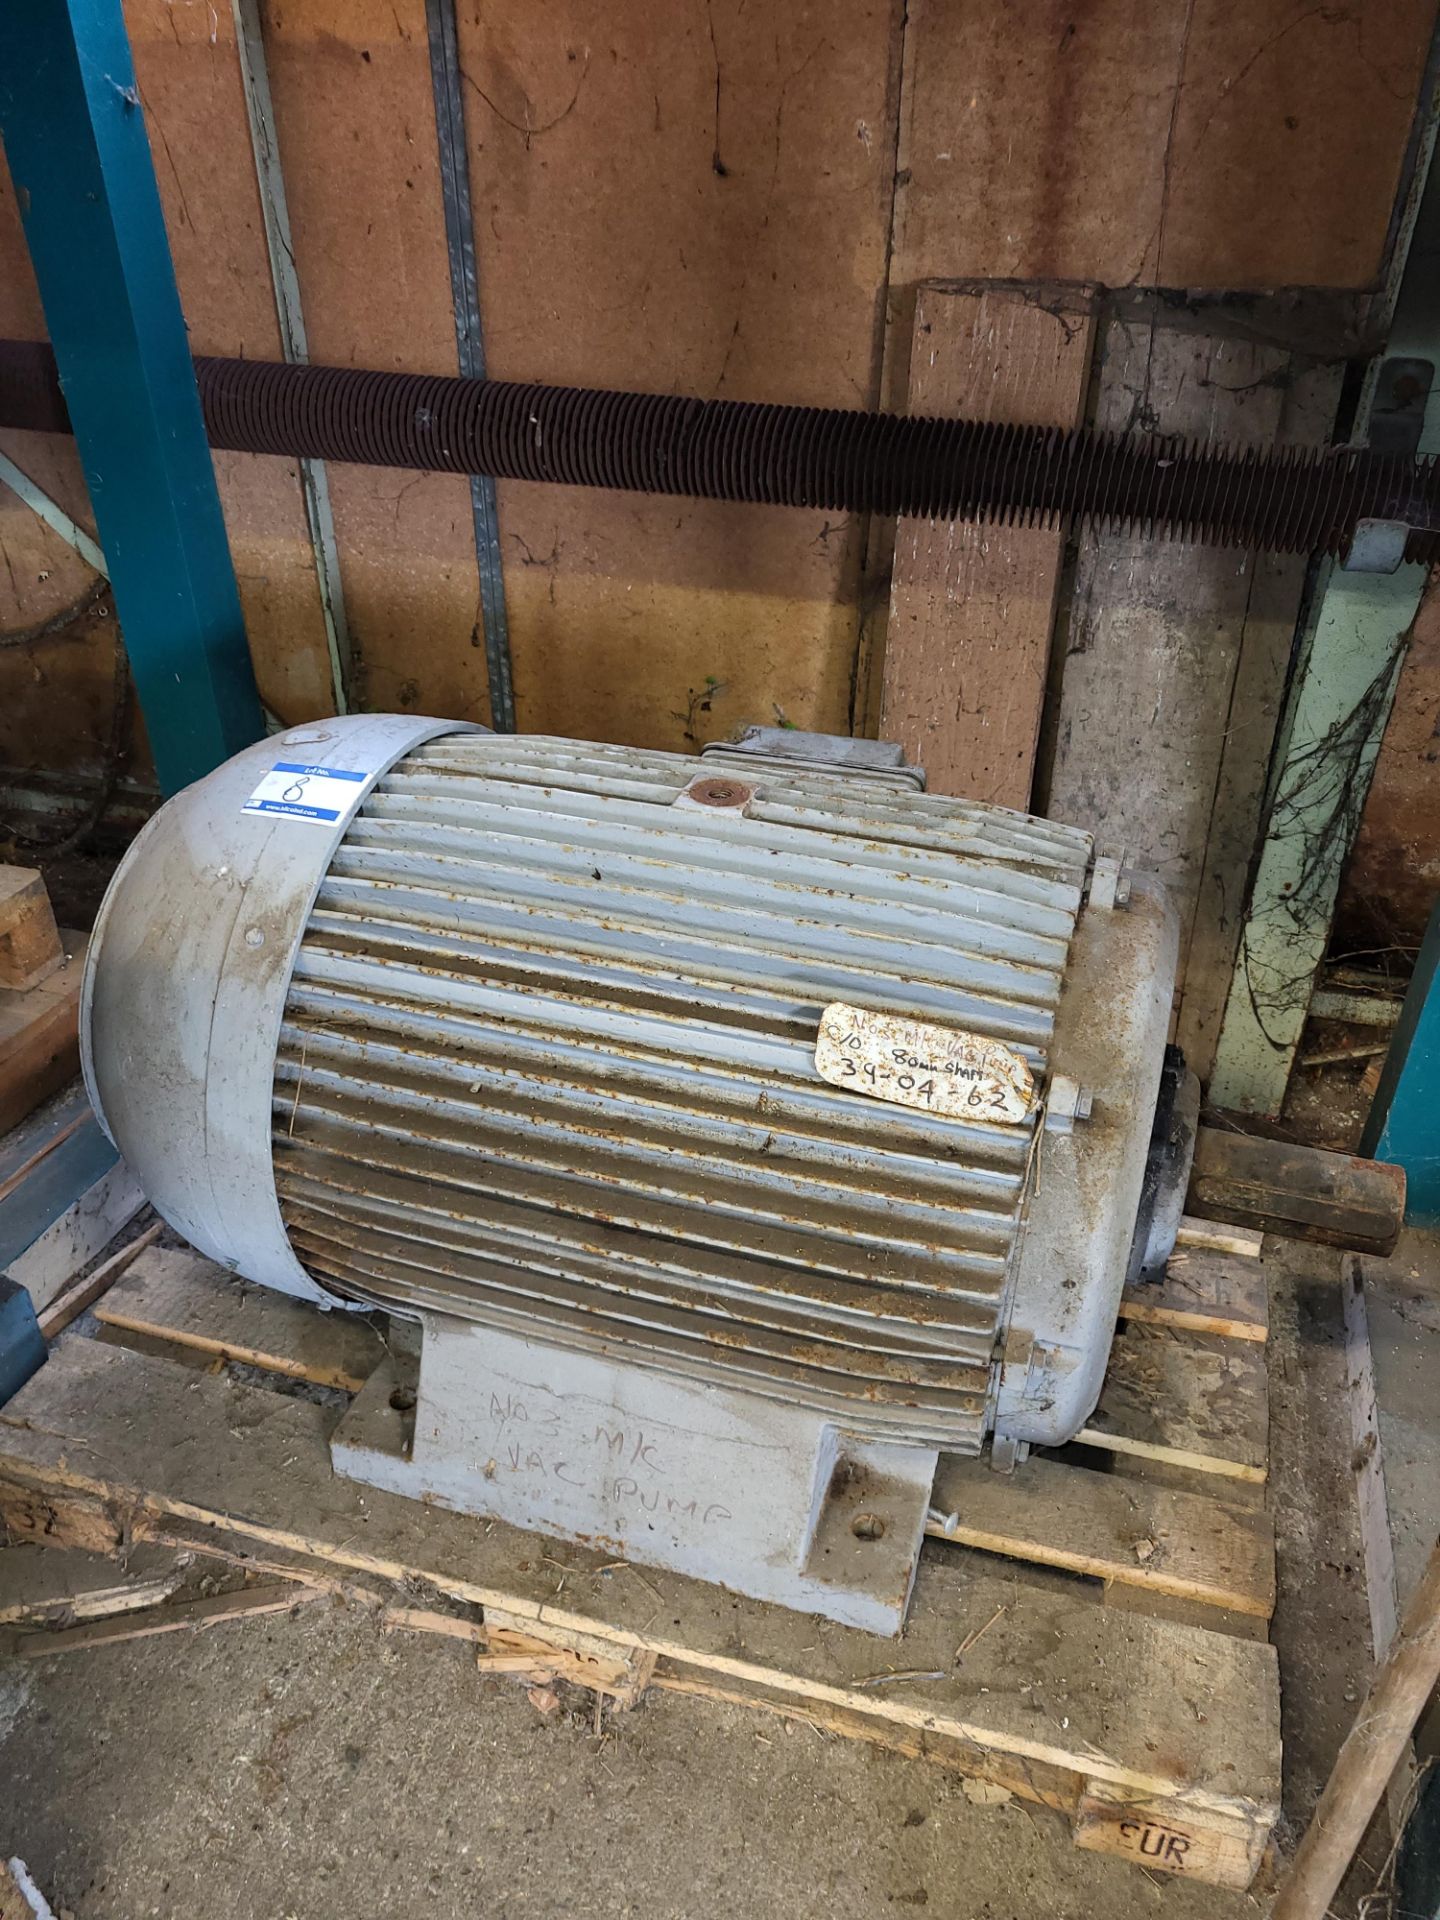 1 Sever Model ZK315MB 168/184KW, 1485/1700 RPM Motor with 80mm Shaft. Arjo Number 39-04-62